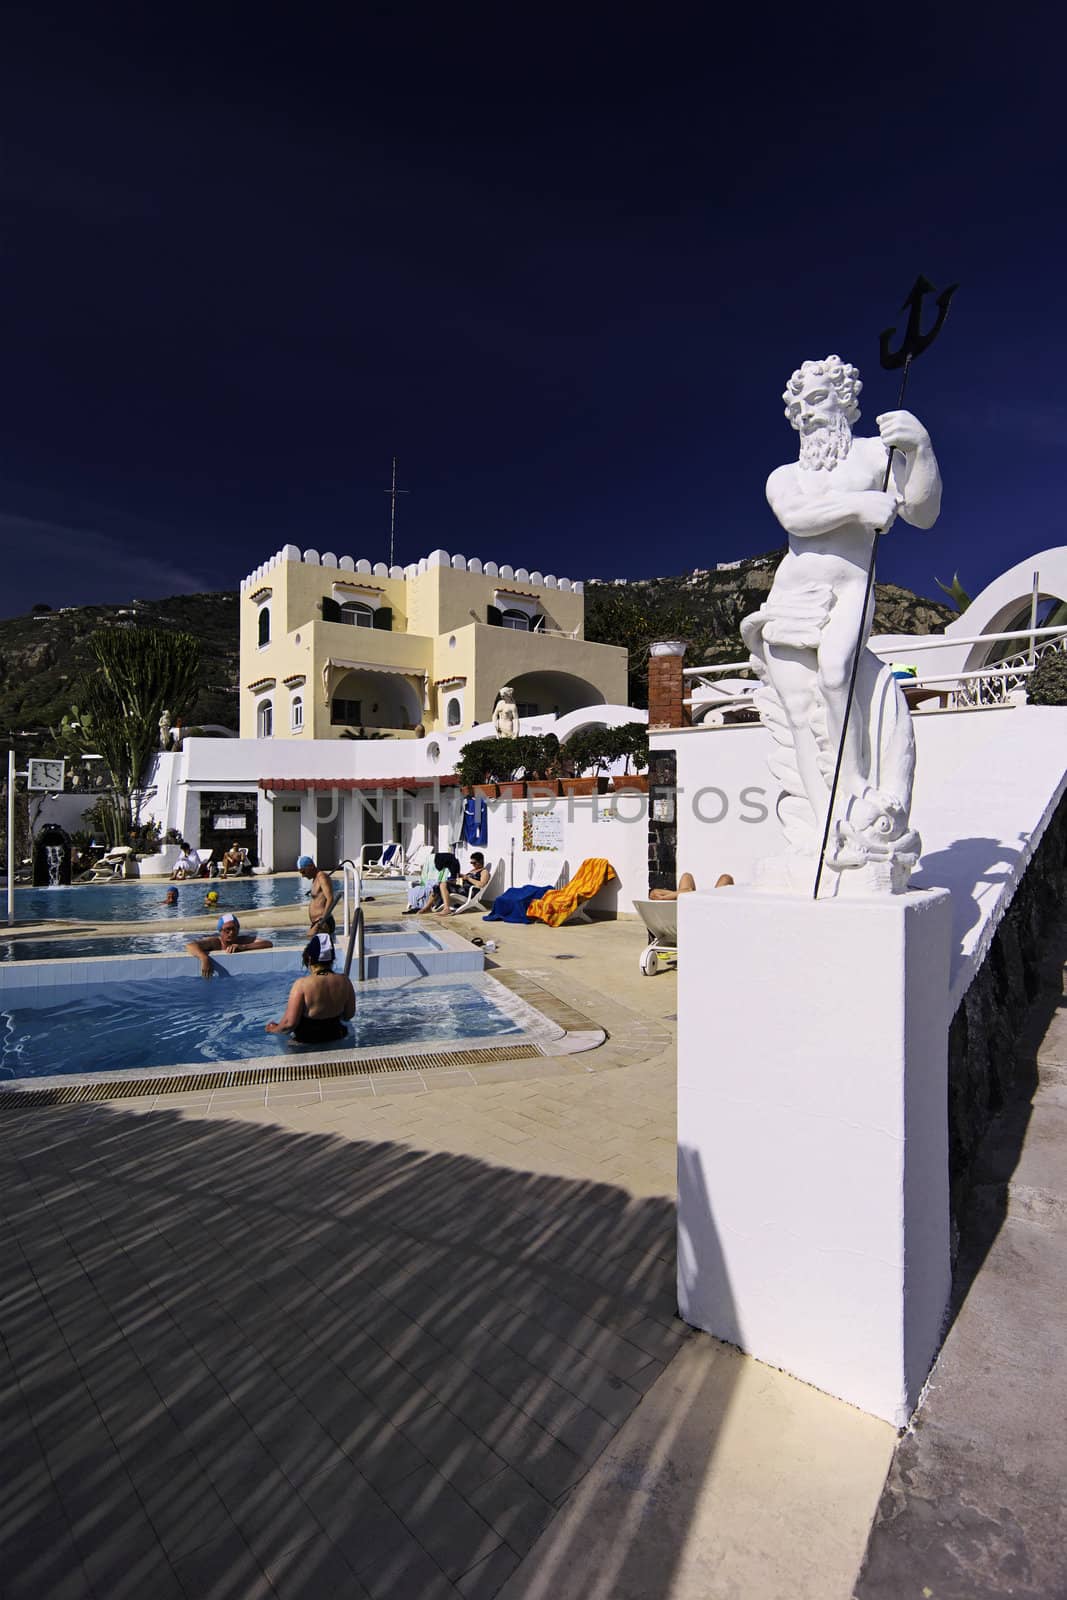 ITALY, Campania, Ischia island, S.Angelo, view of the "Tropical Residence", a thermal hotel in S.Angelo